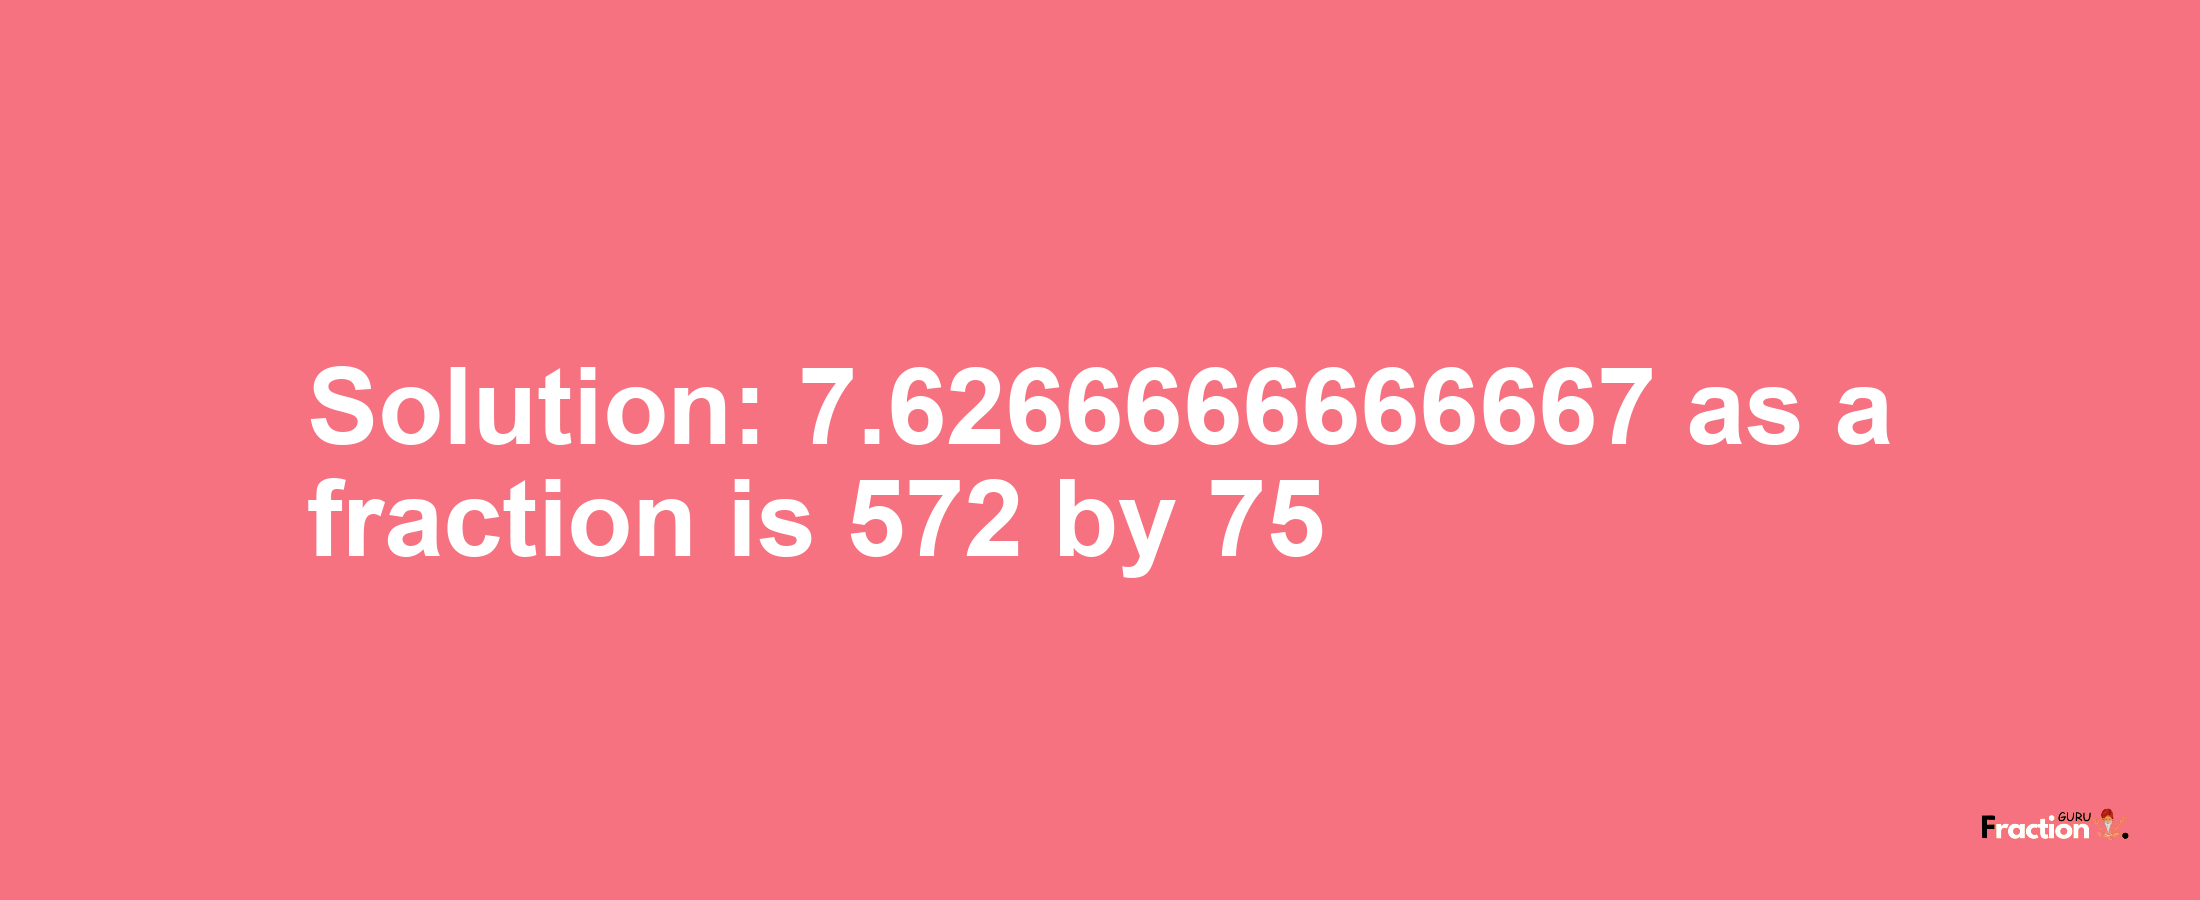 Solution:7.6266666666667 as a fraction is 572/75